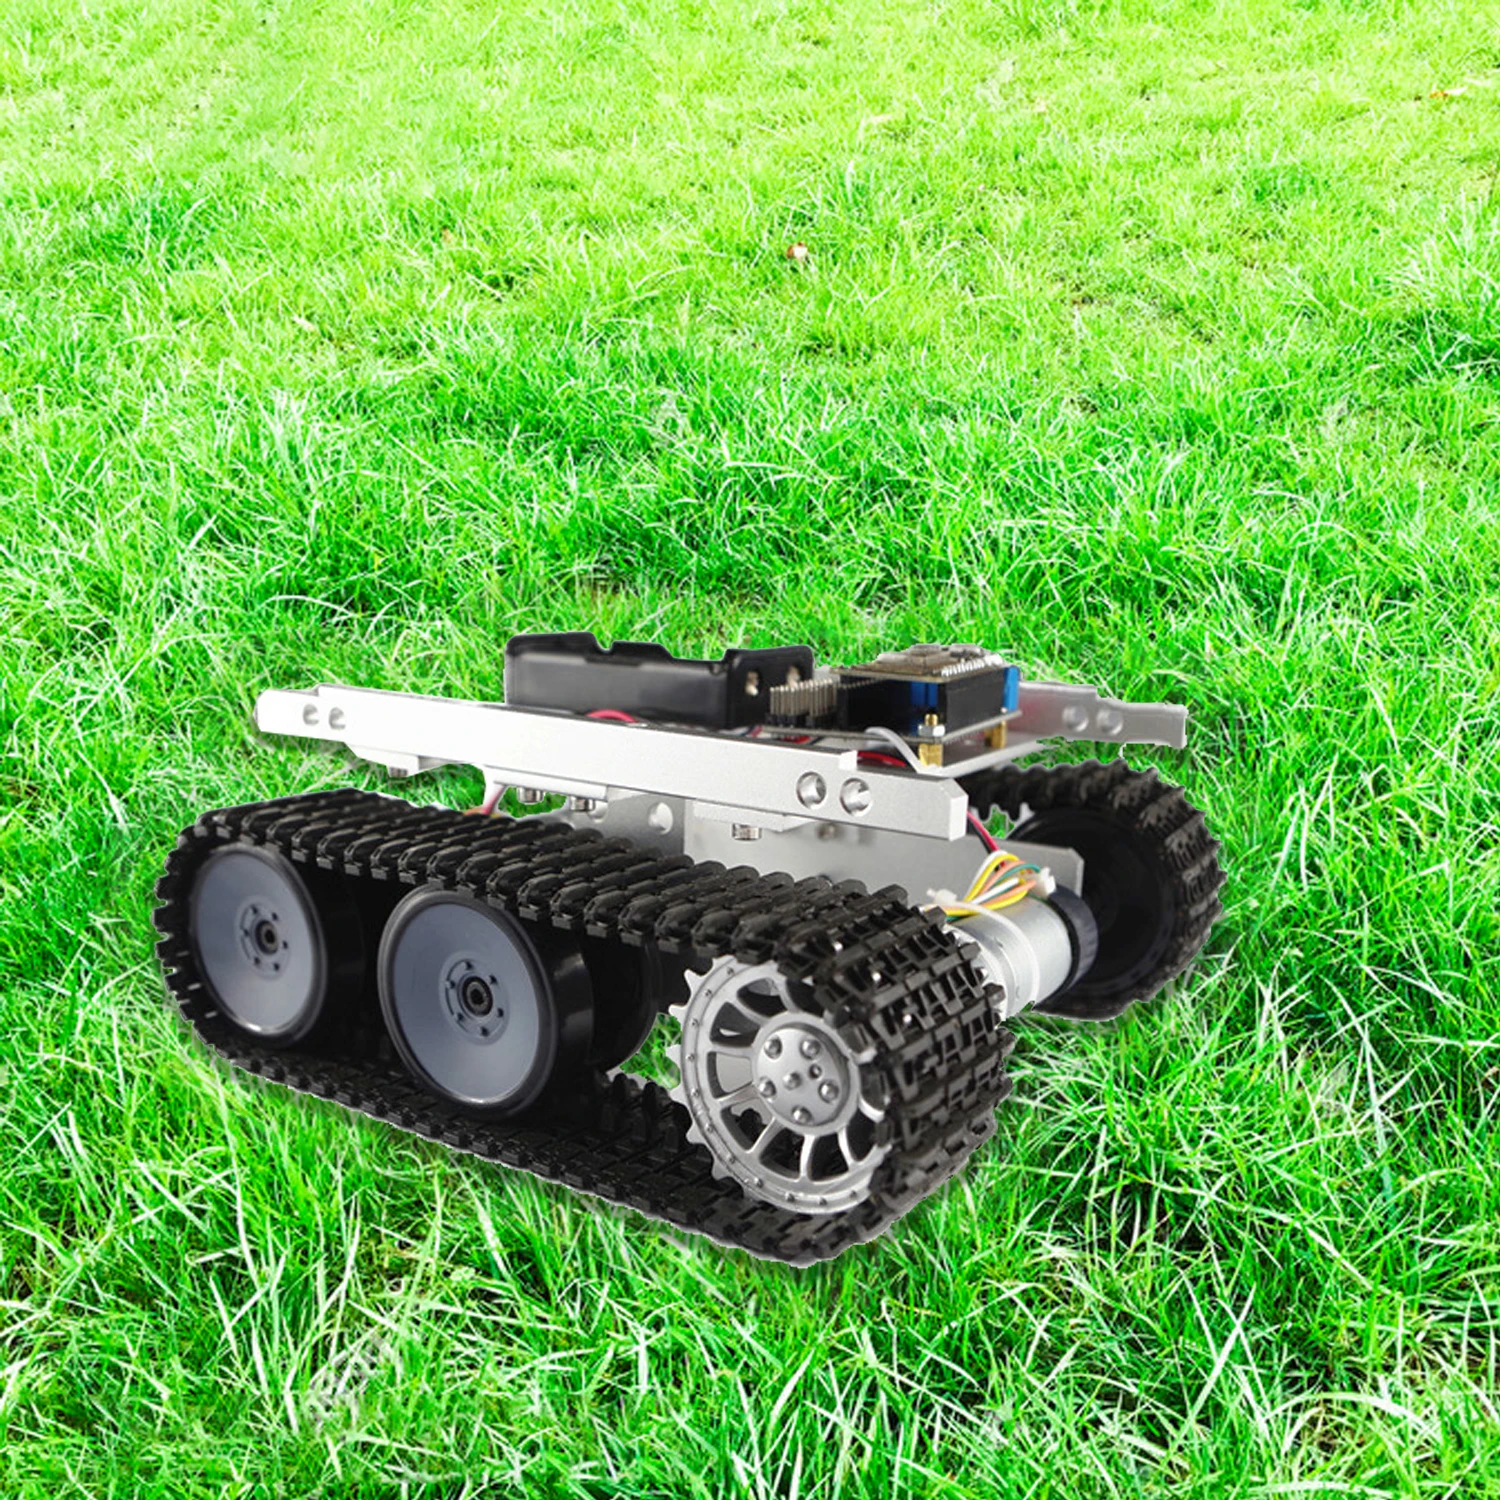 Original Robot Tank Car Chassis TP100 Caterpillar Clawler DIY Toy Robot Remote Control Smart Chain Platform Tracked Vehicle enlarge